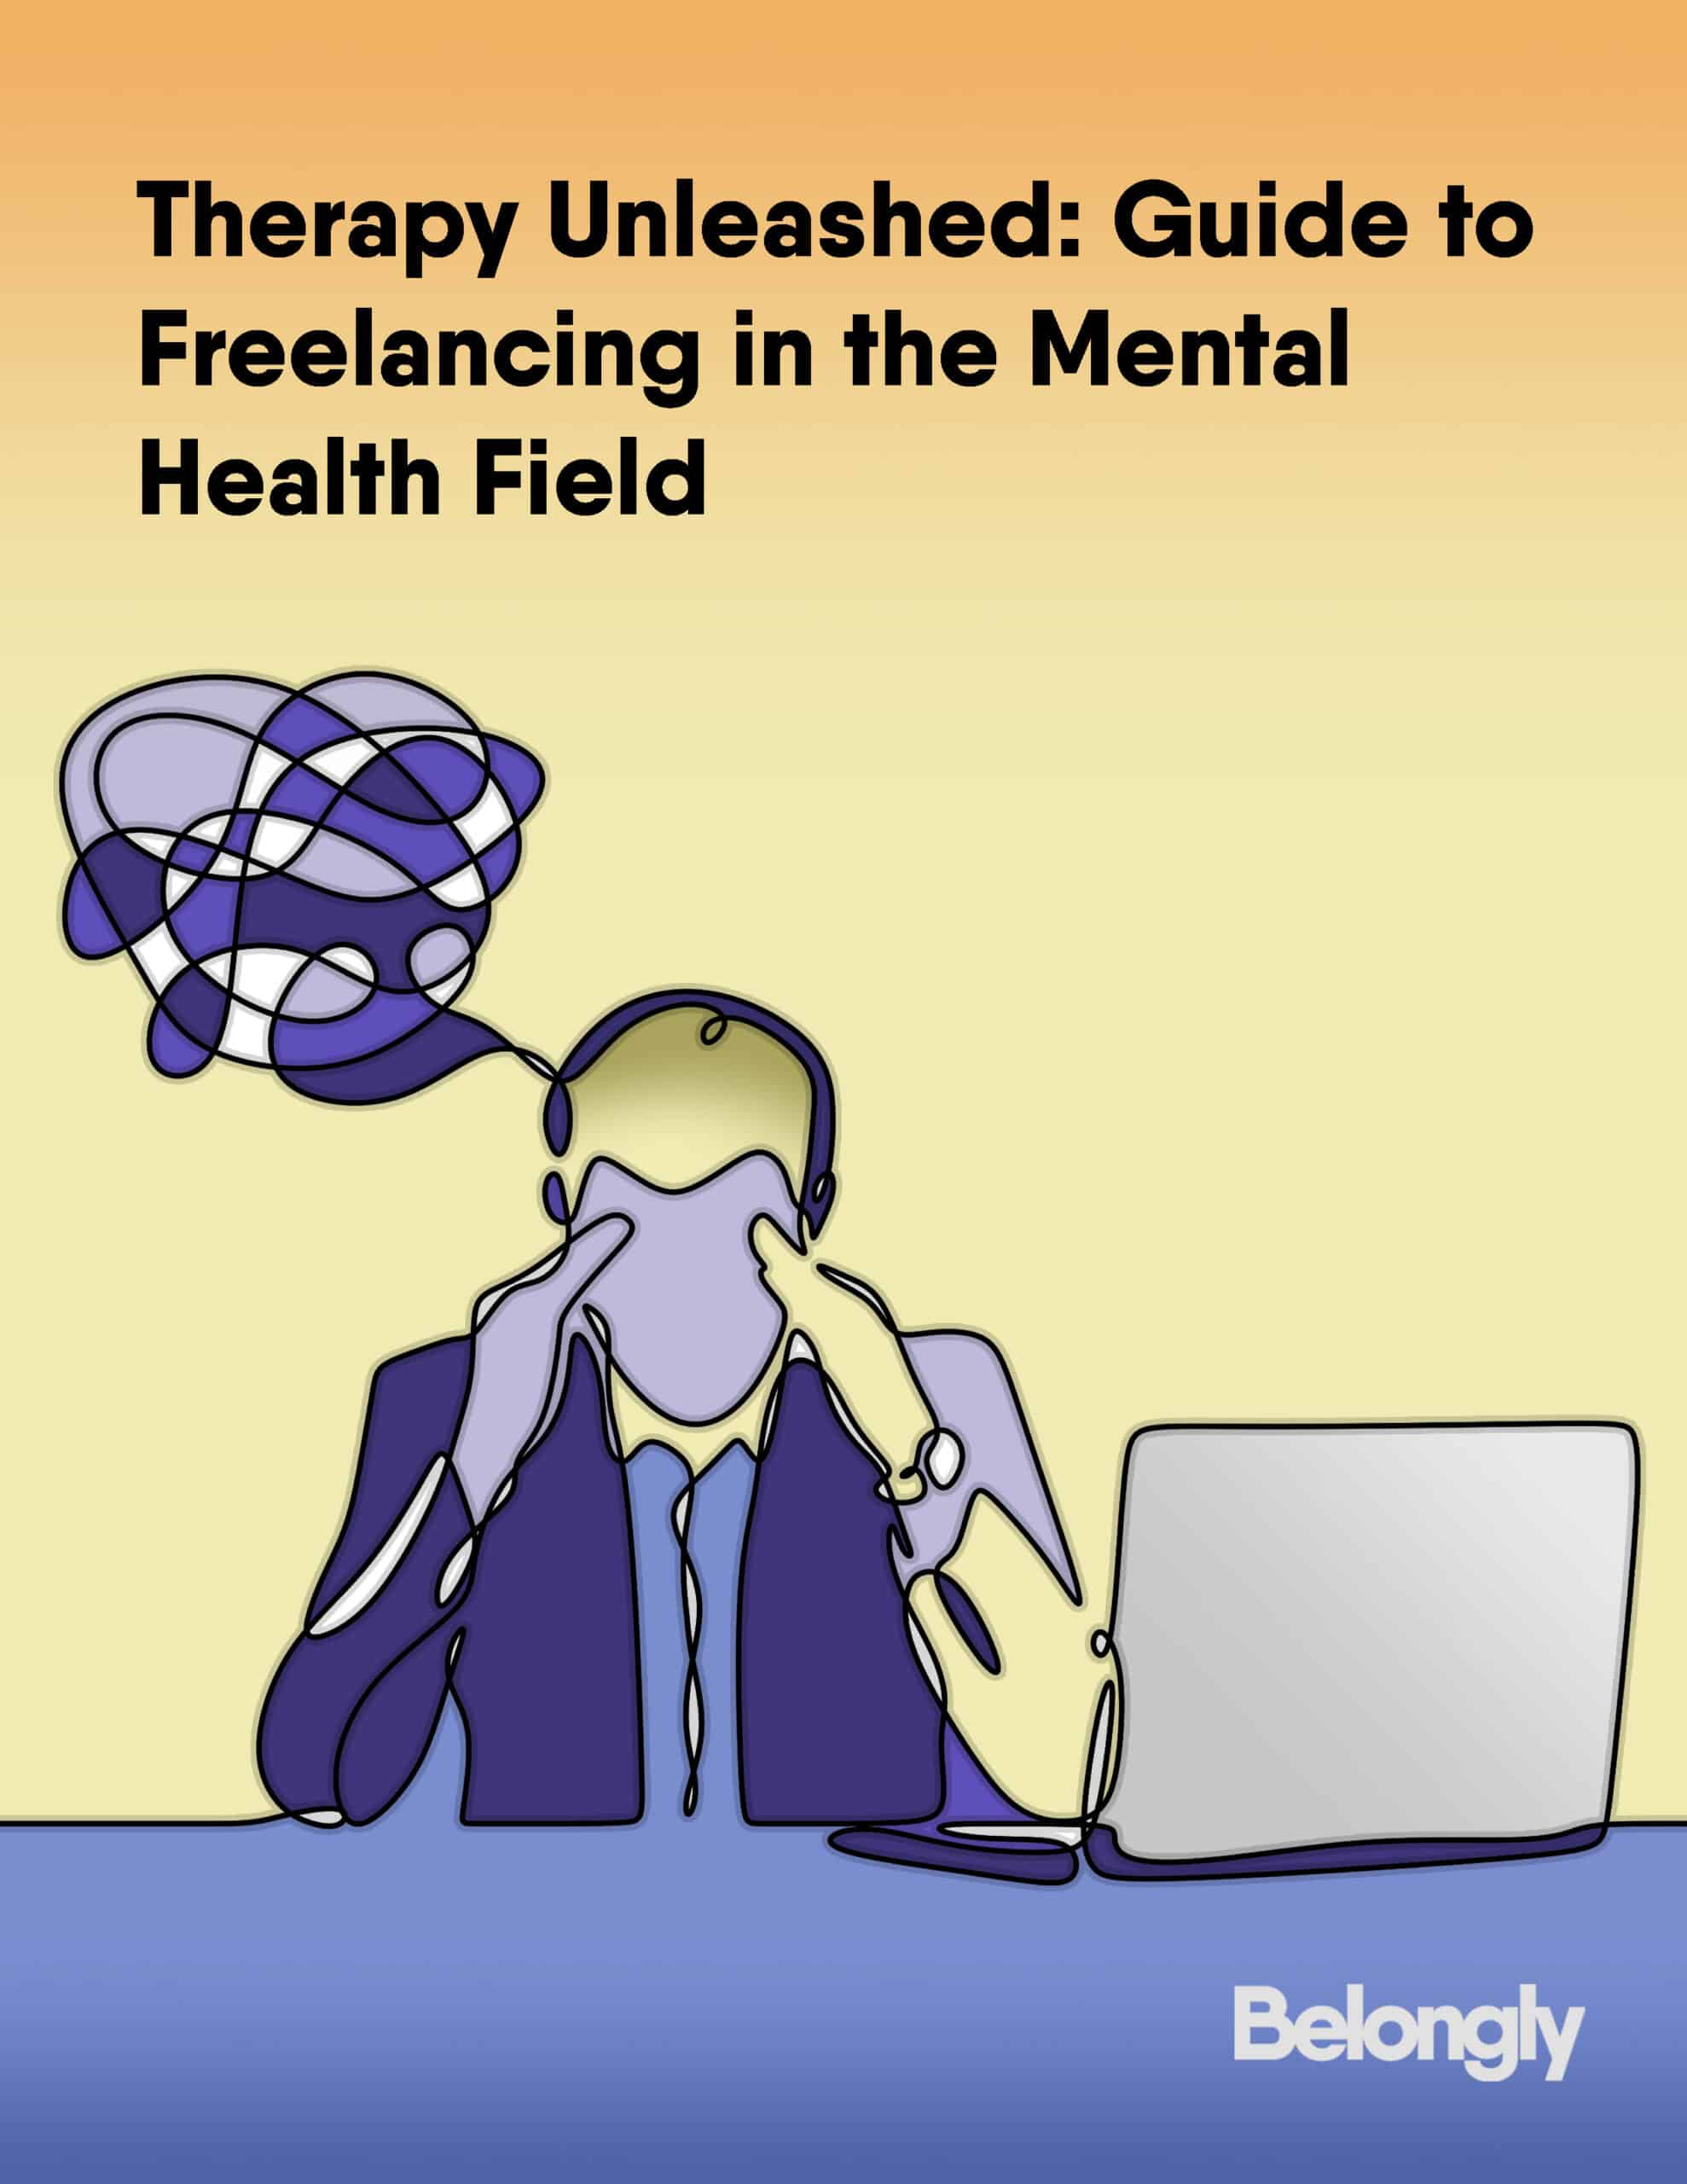 Freelancing in the mental health